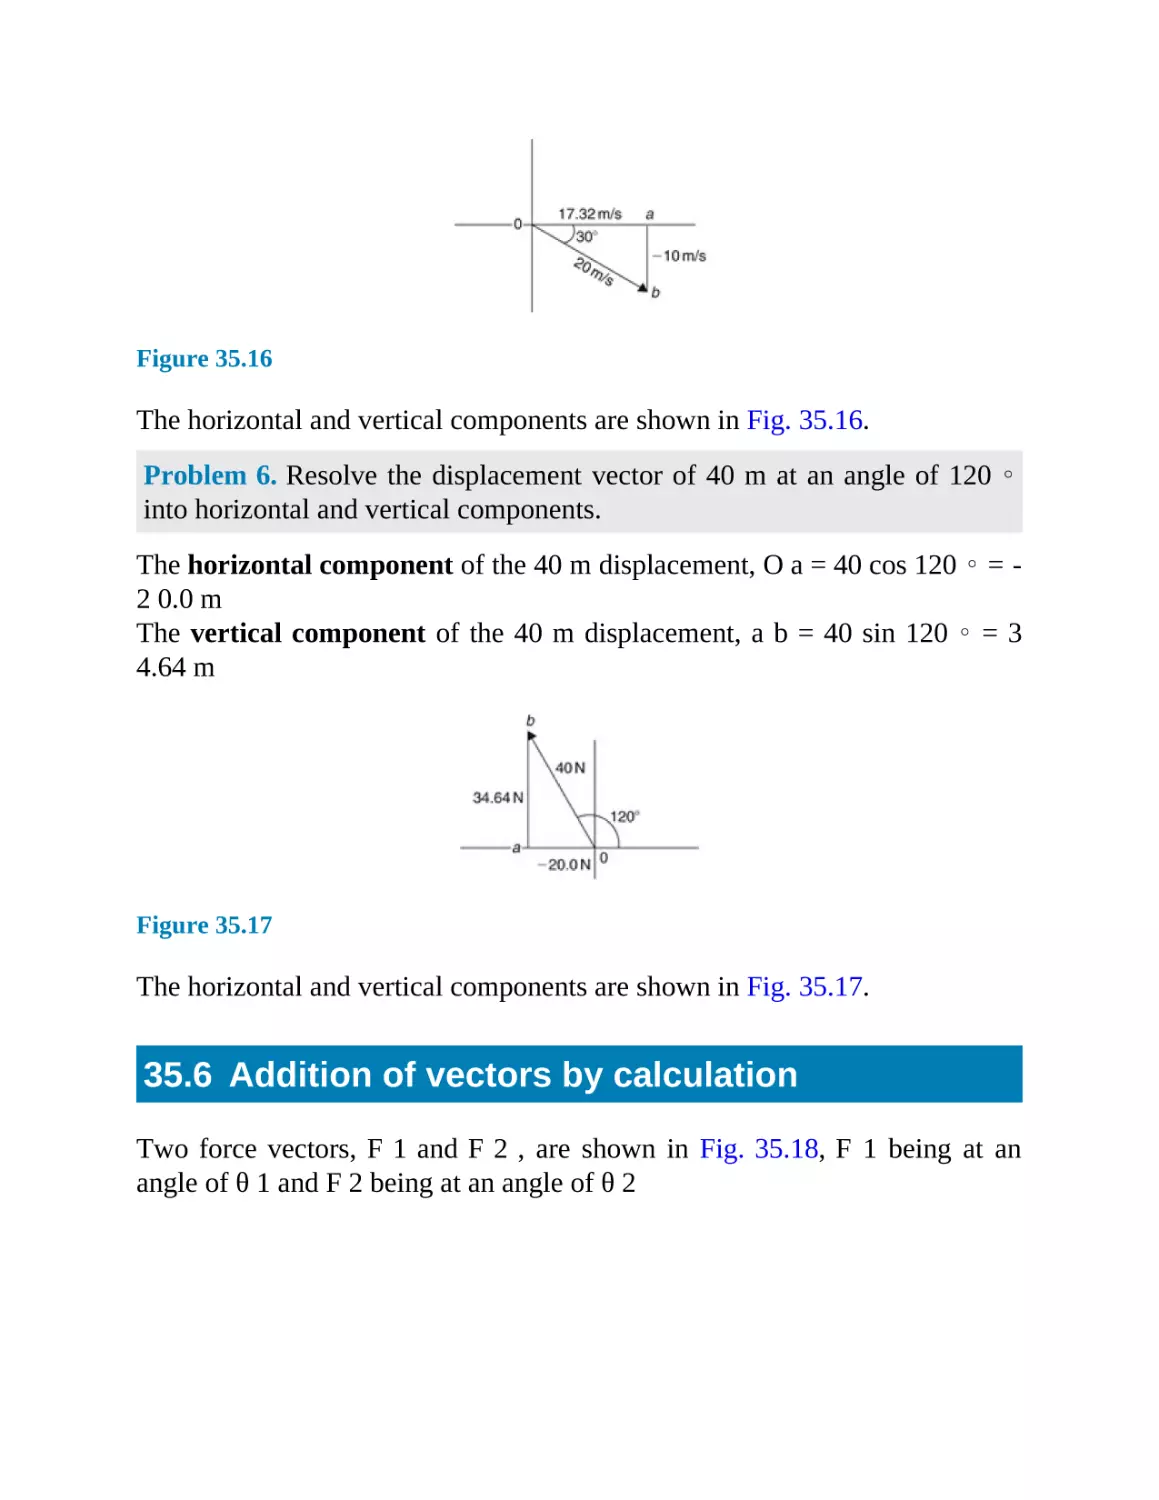 35.6 Addition of vectors by calculation